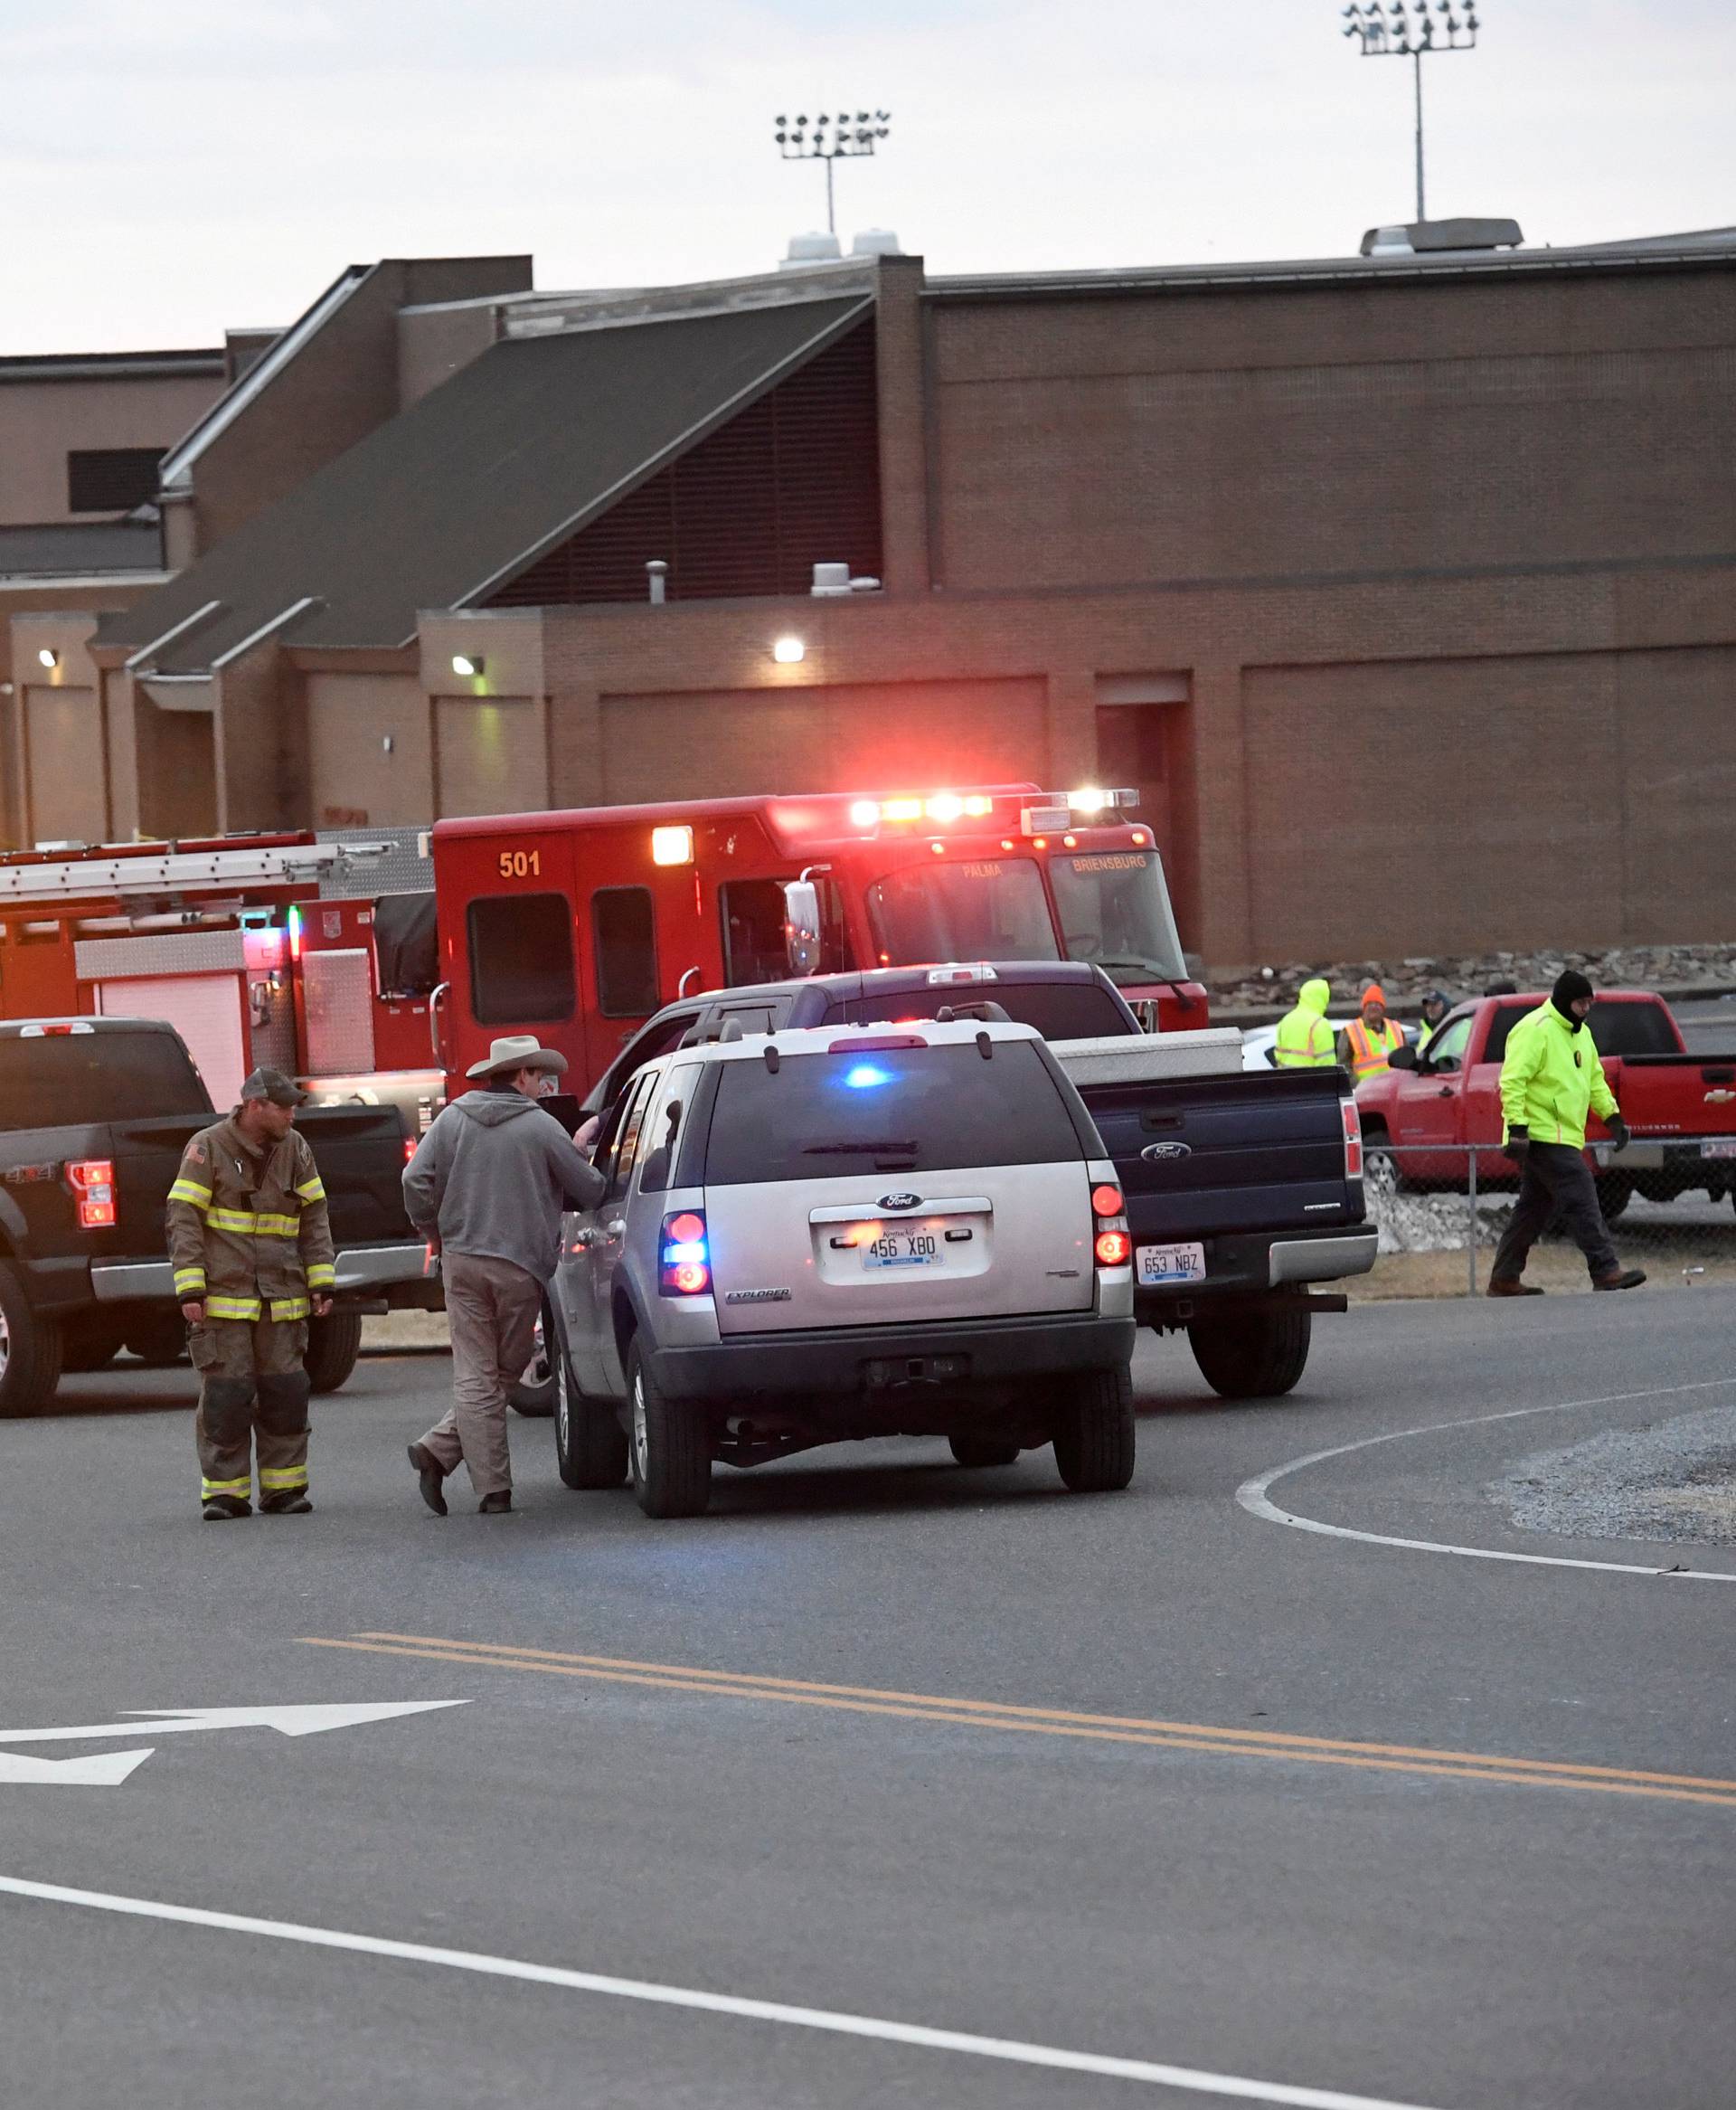 Police investigators are seen at the scene of a shooting at Marshall County High School in Benton, Kentucky